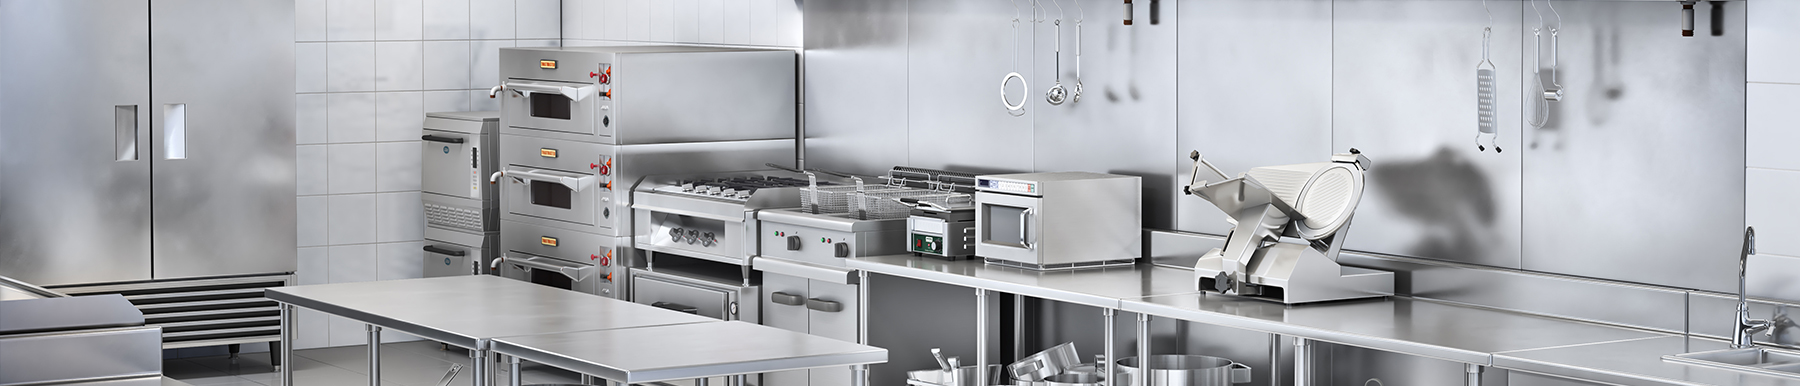 Catering Equipment Suppliers Near Bristol | H2 Catering Equipment Catering Equipment